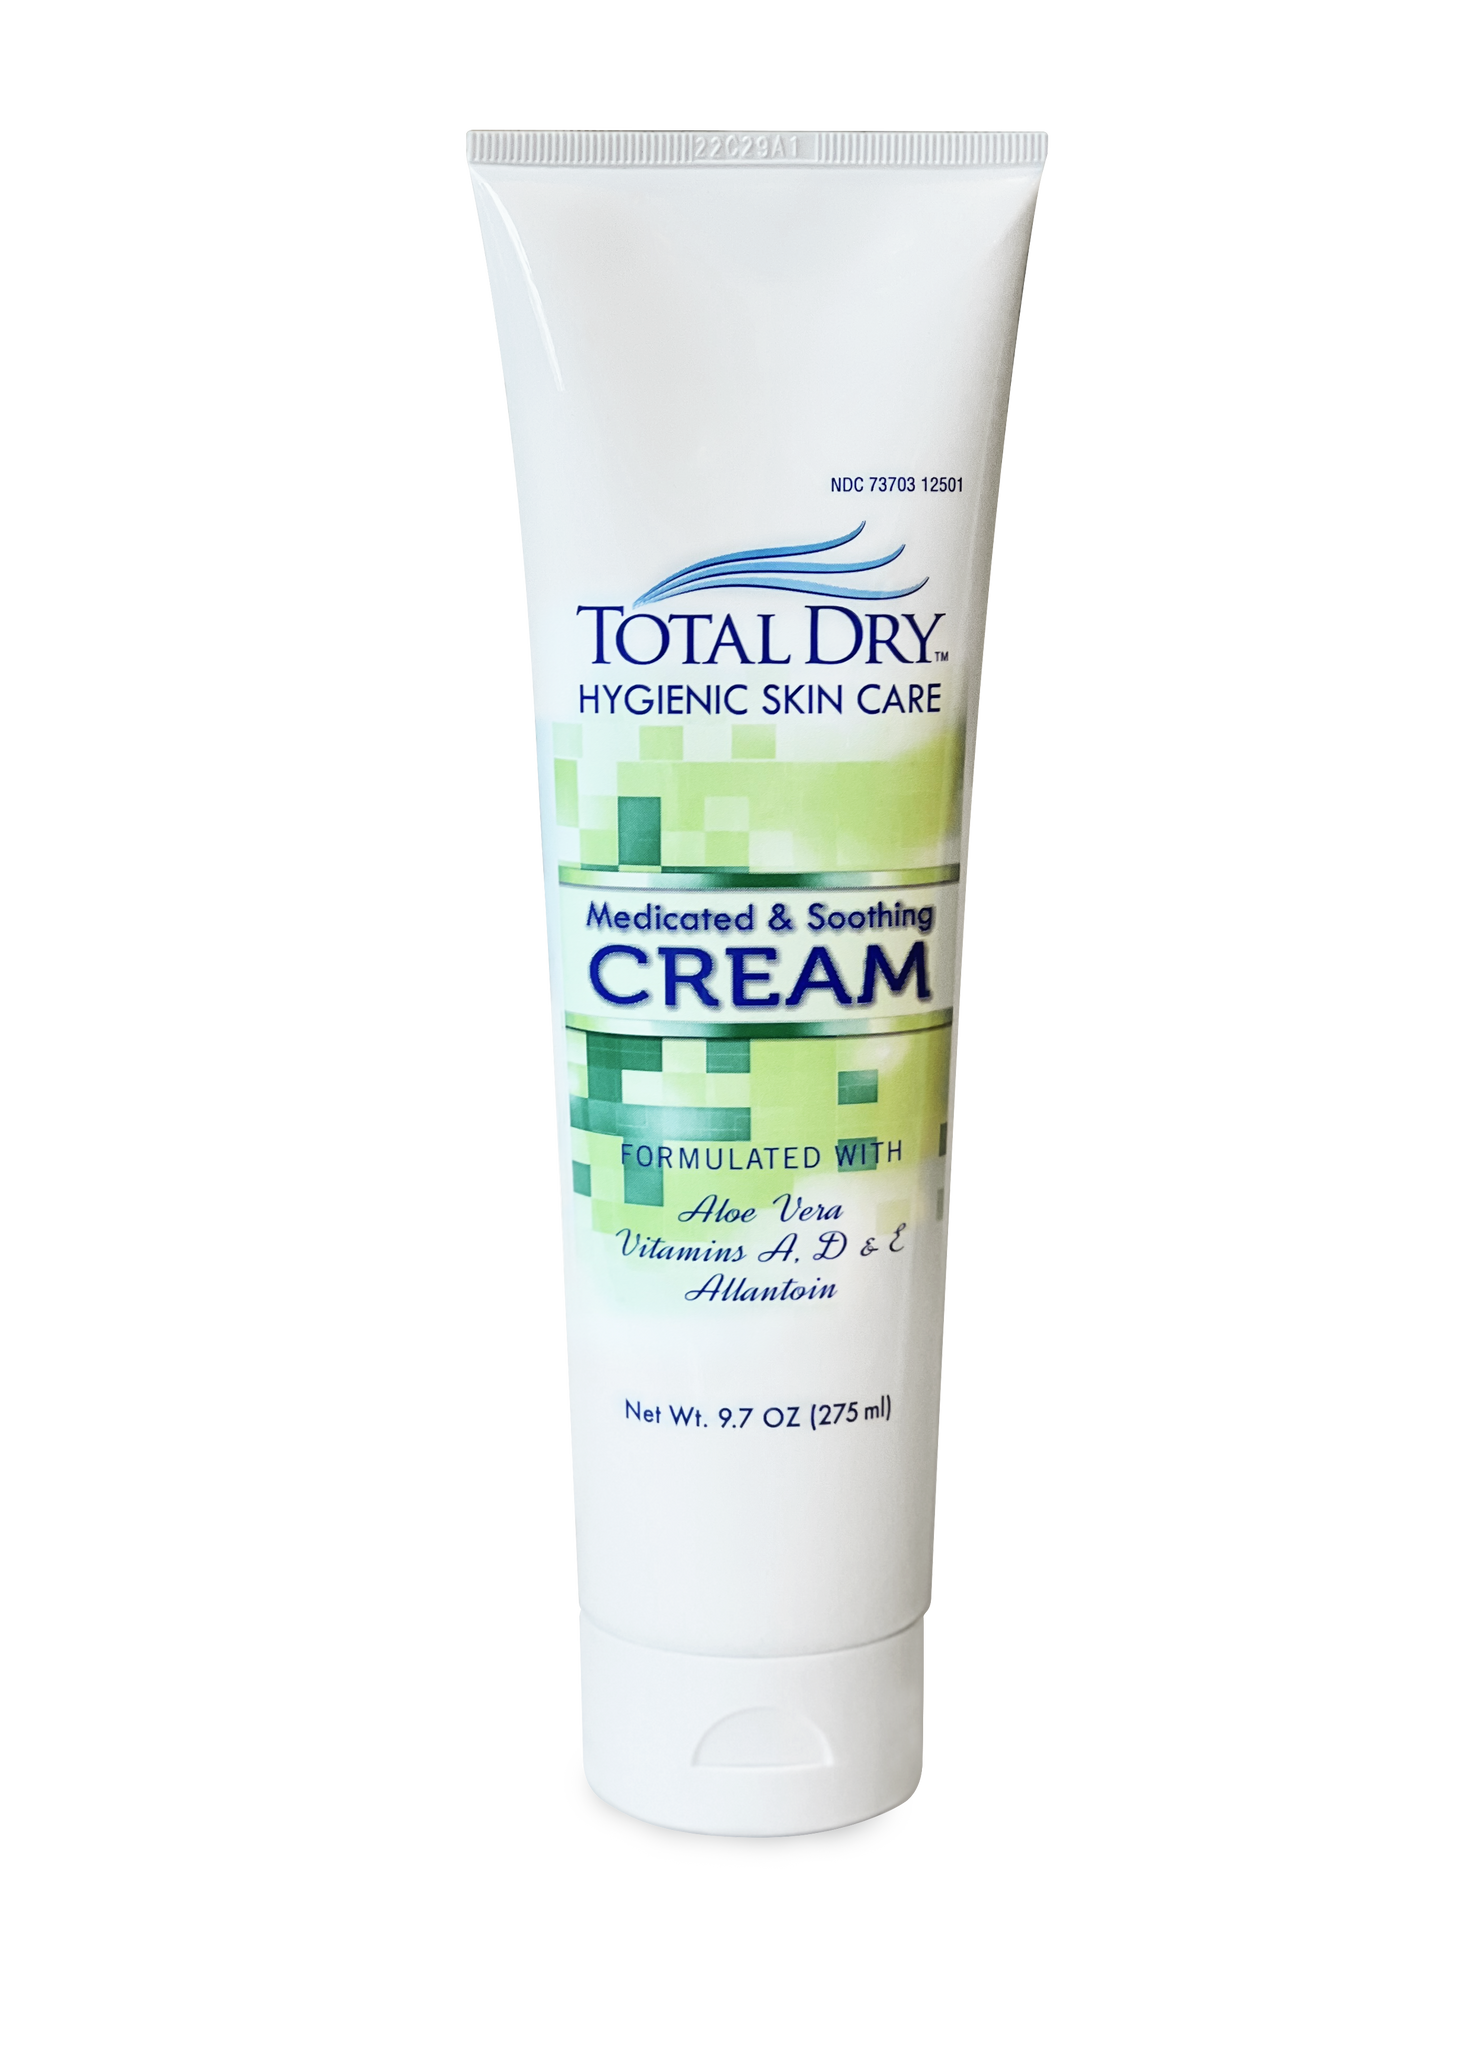 Total Dry Medicated Soothing Cream (Moisture Barrier Cream)